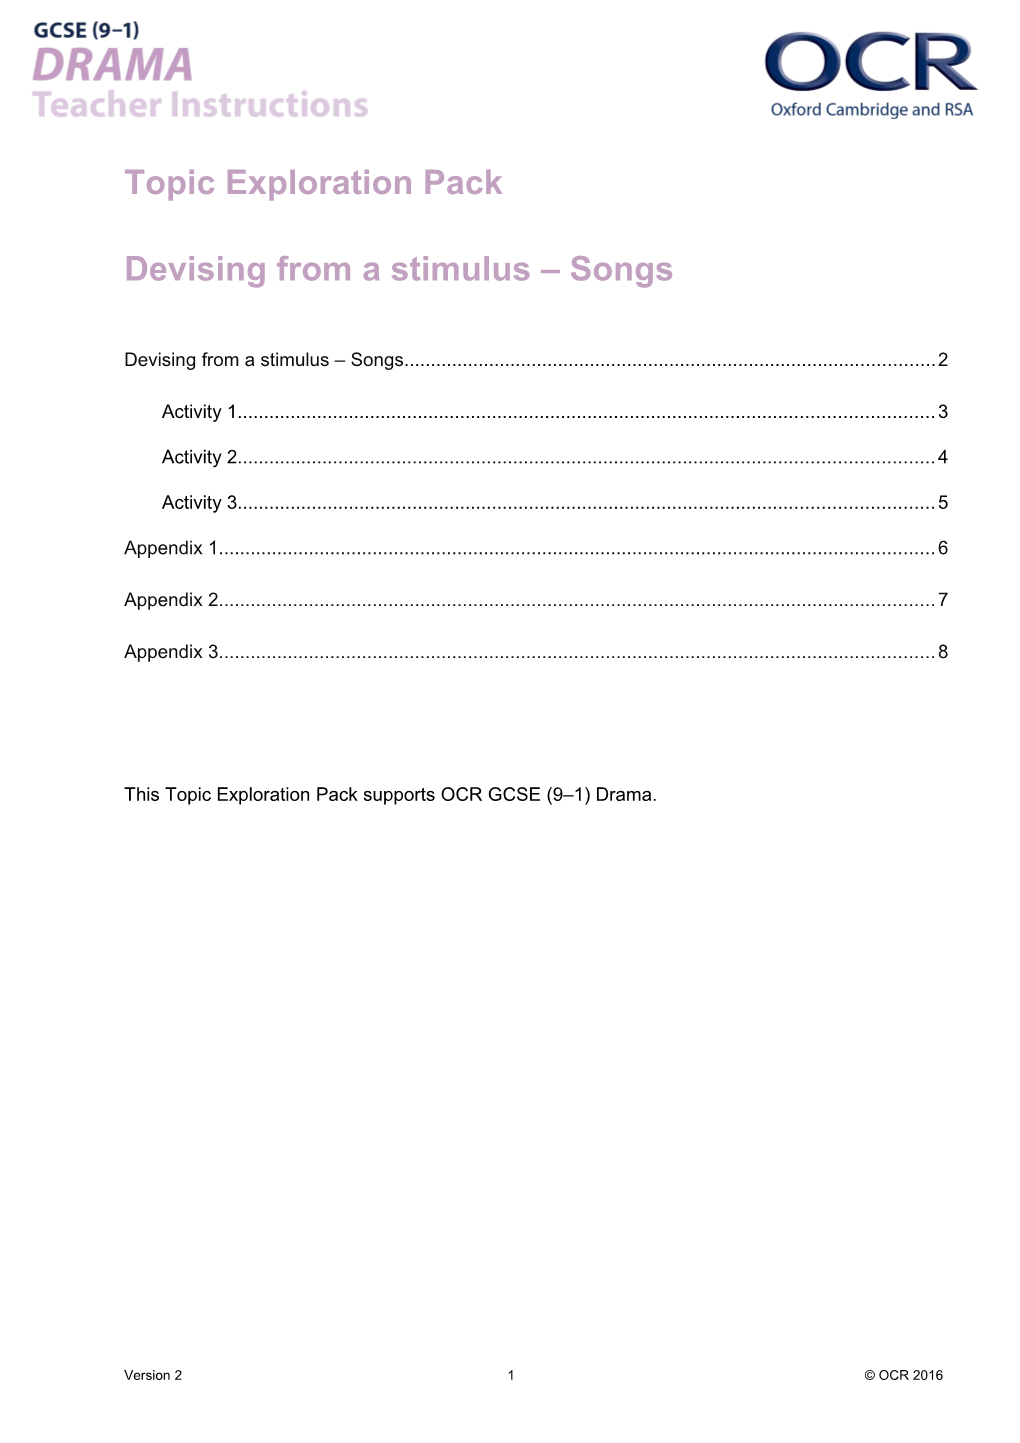 GCSE (9-1) Drama Topic Exploration Pack (Devising from a Stimulus Songs)